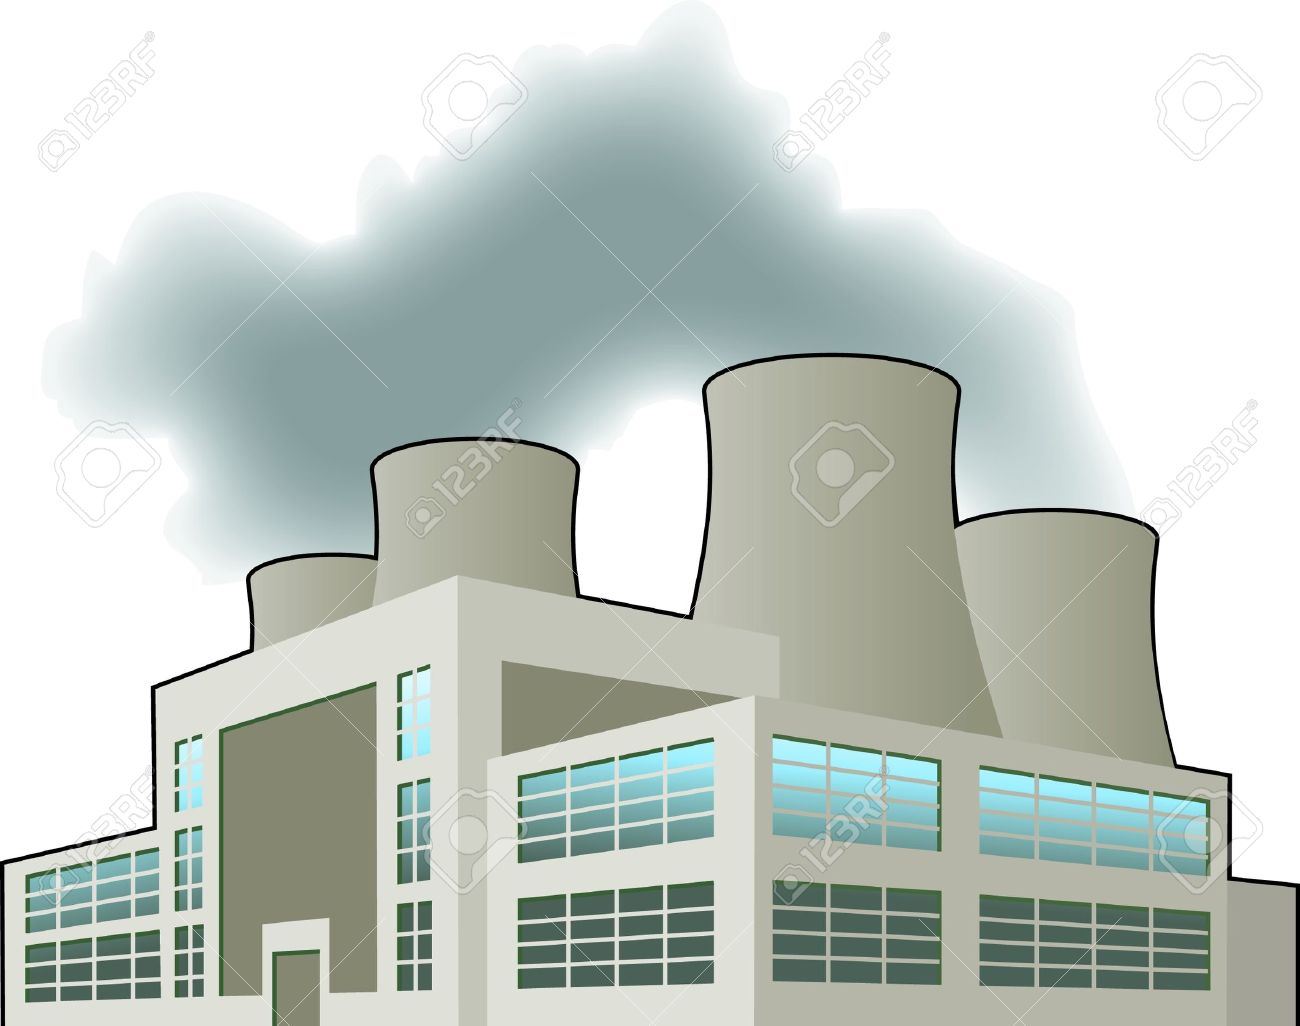 free clipart power station - photo #3